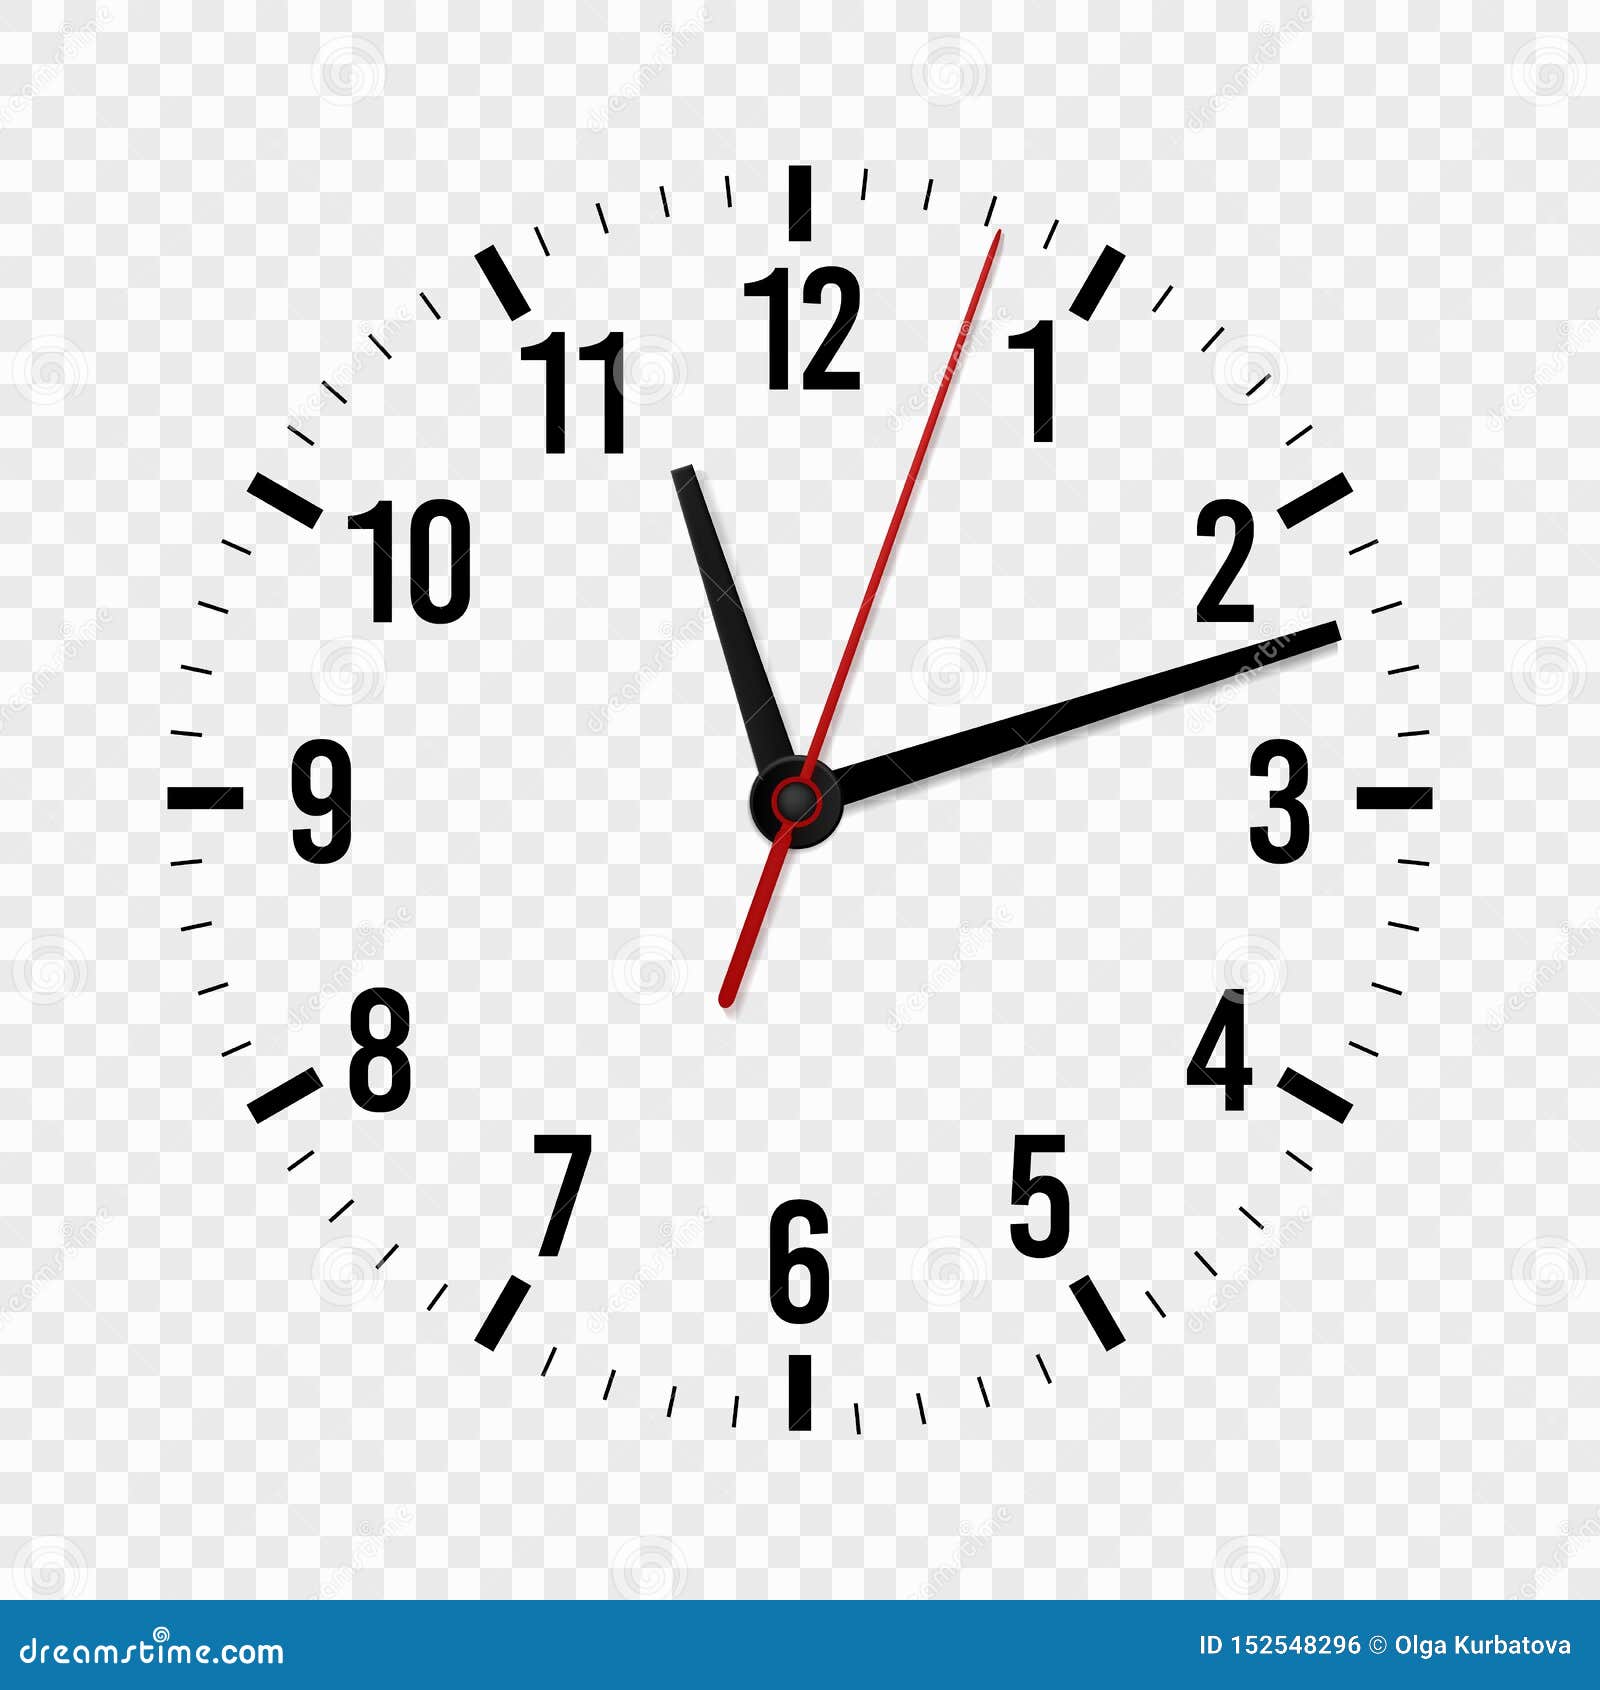 clock-mockup-hour-minute-and-second-hands-with-a-time-scale-for